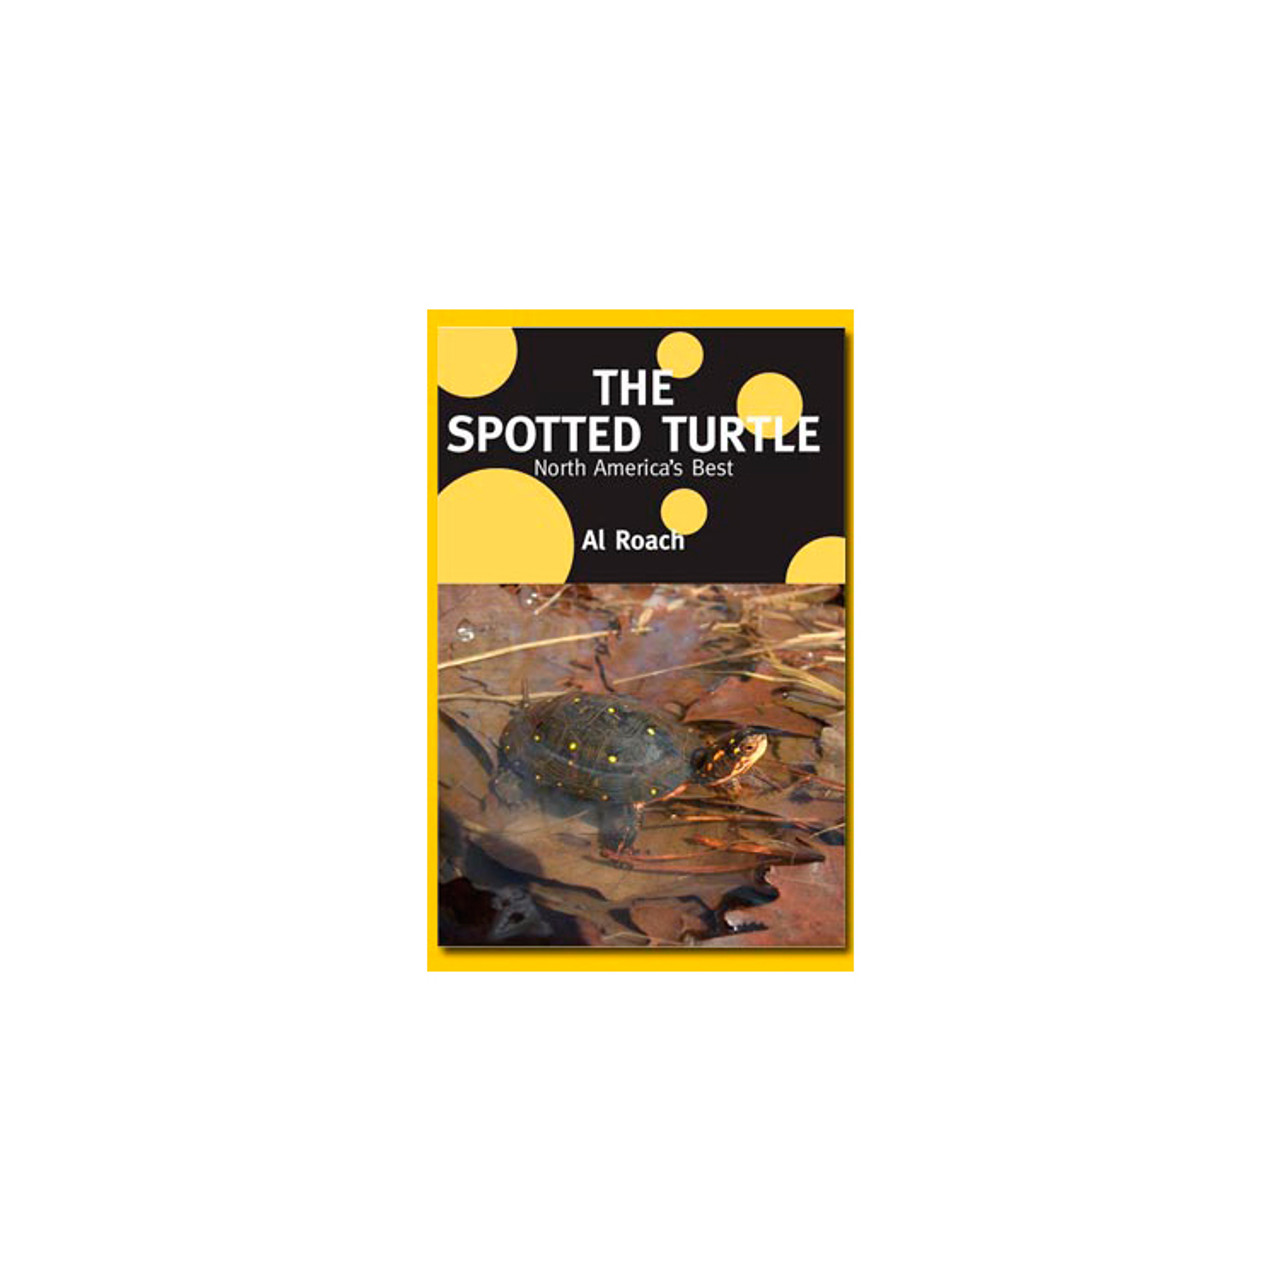 The Spotted Turtle